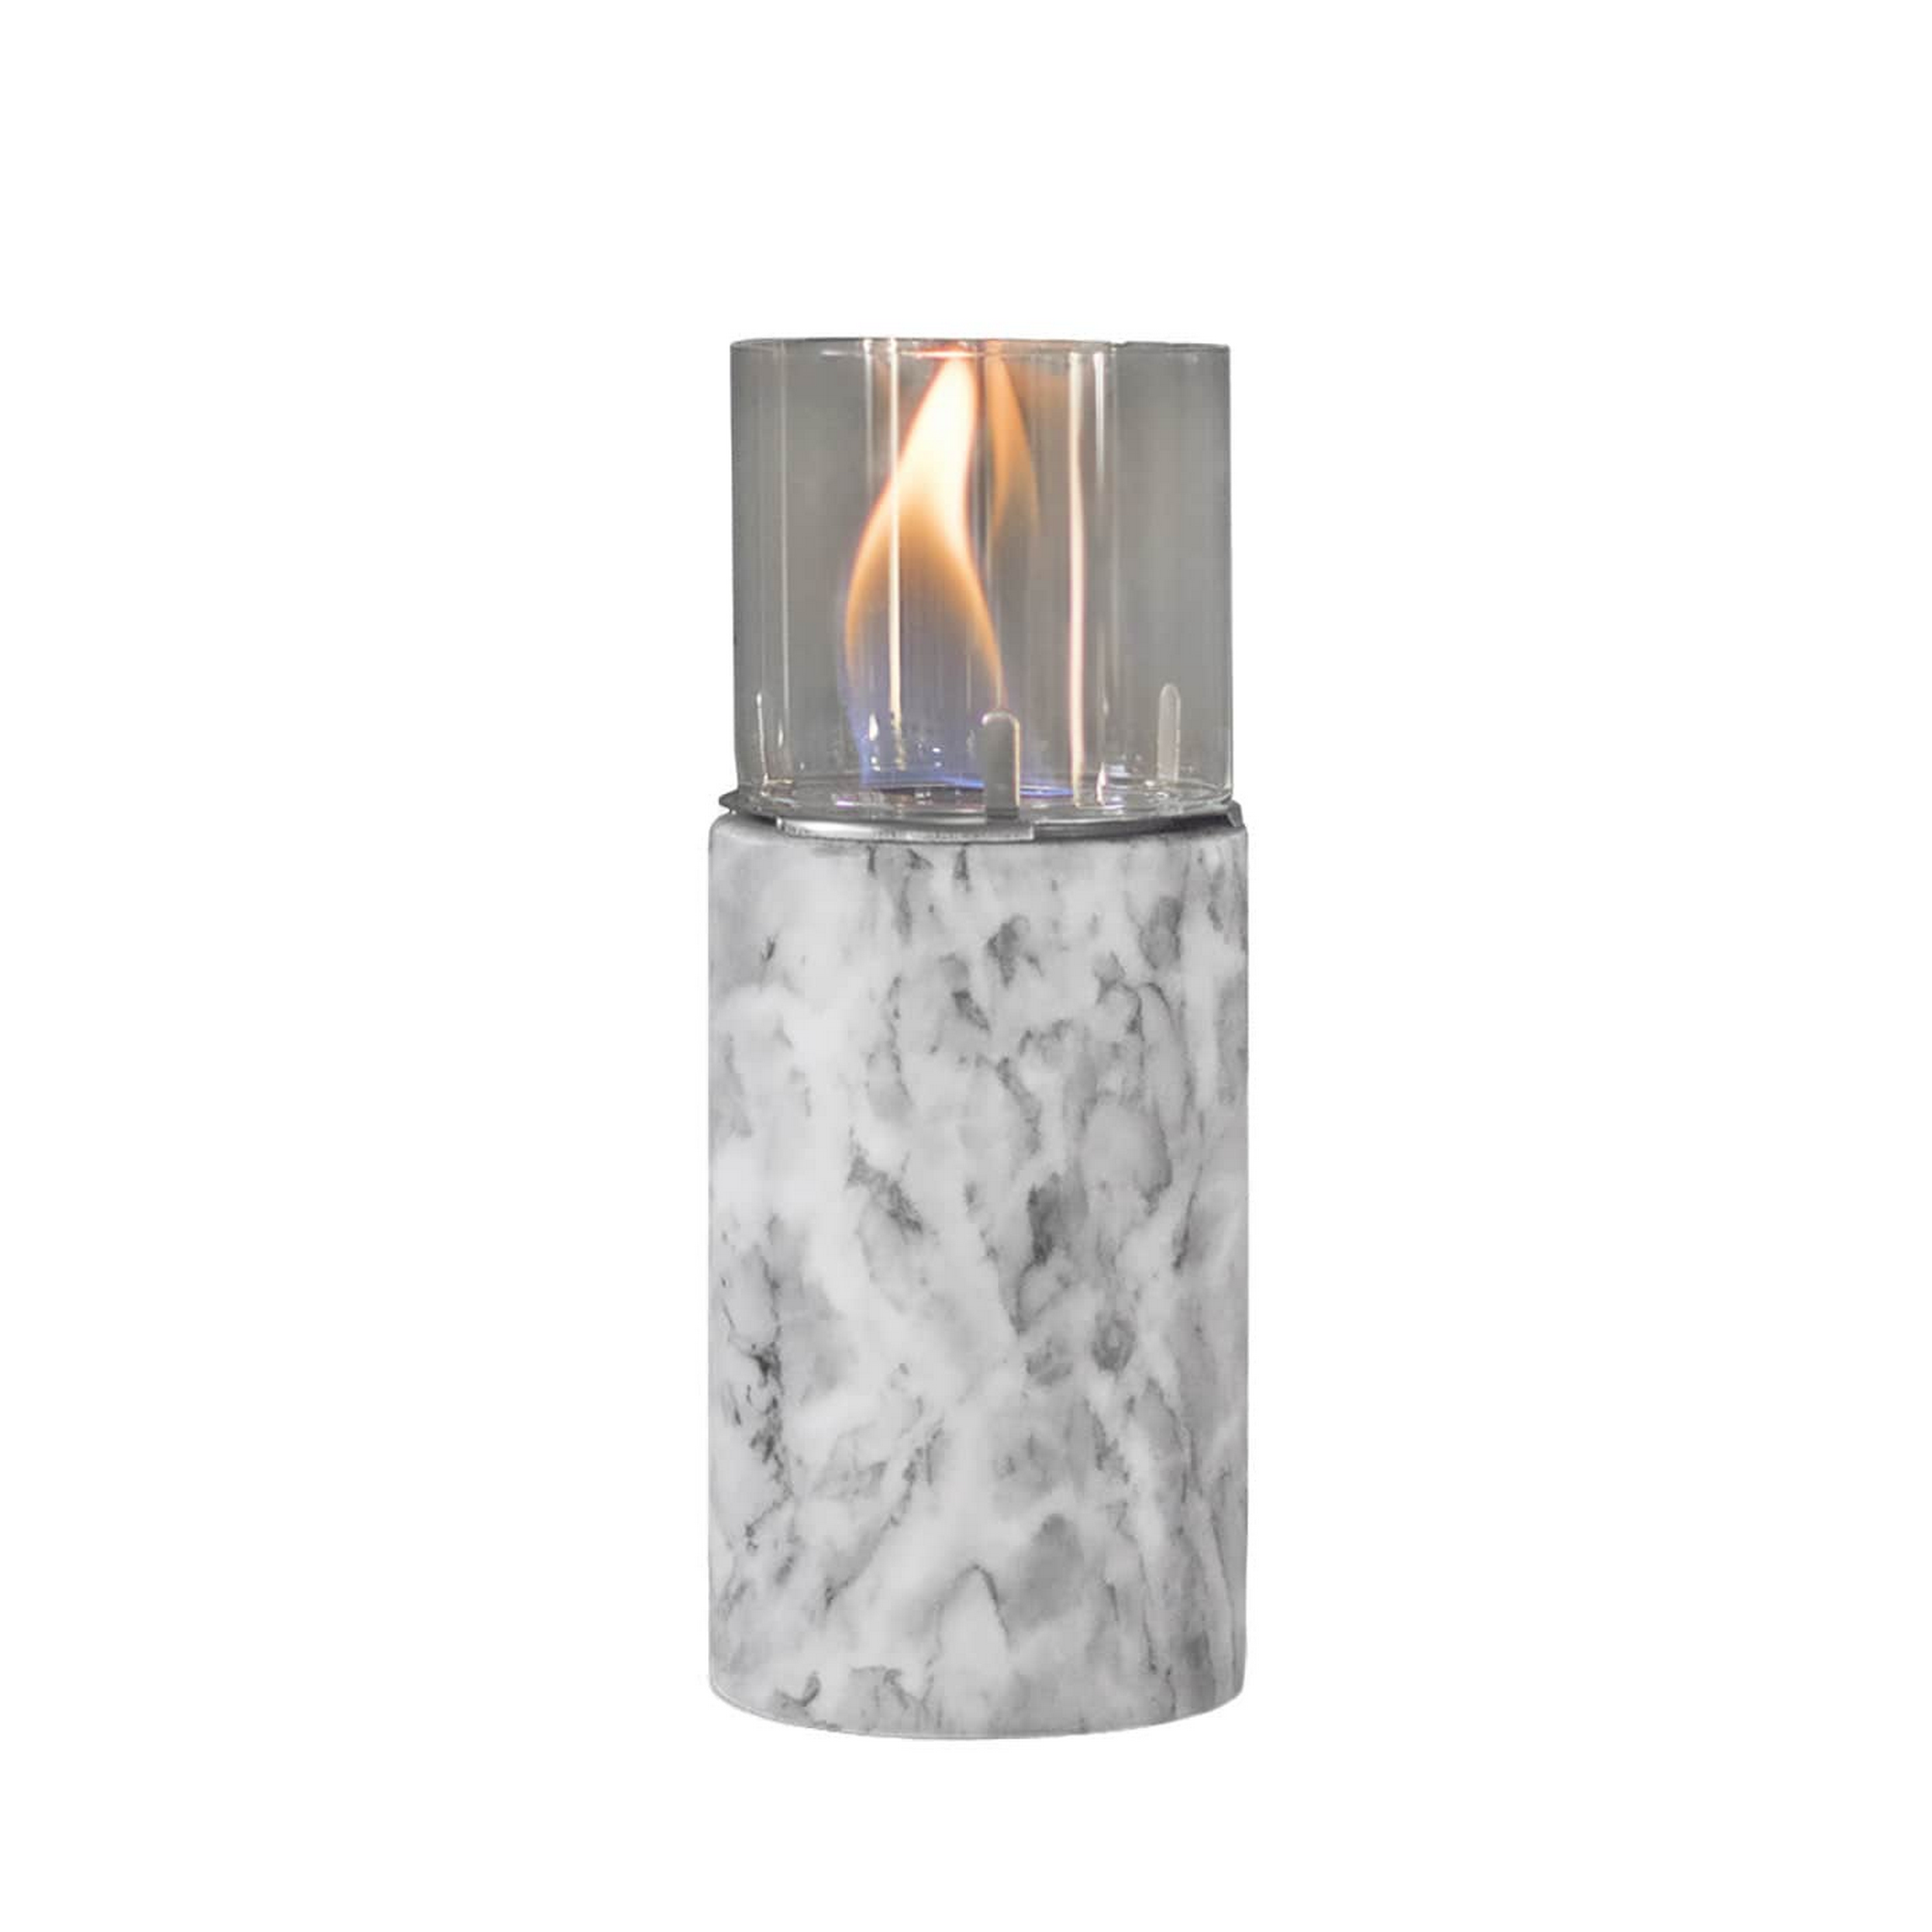 Tischfeuer 'Siena S' Marmor 150 ml + product picture